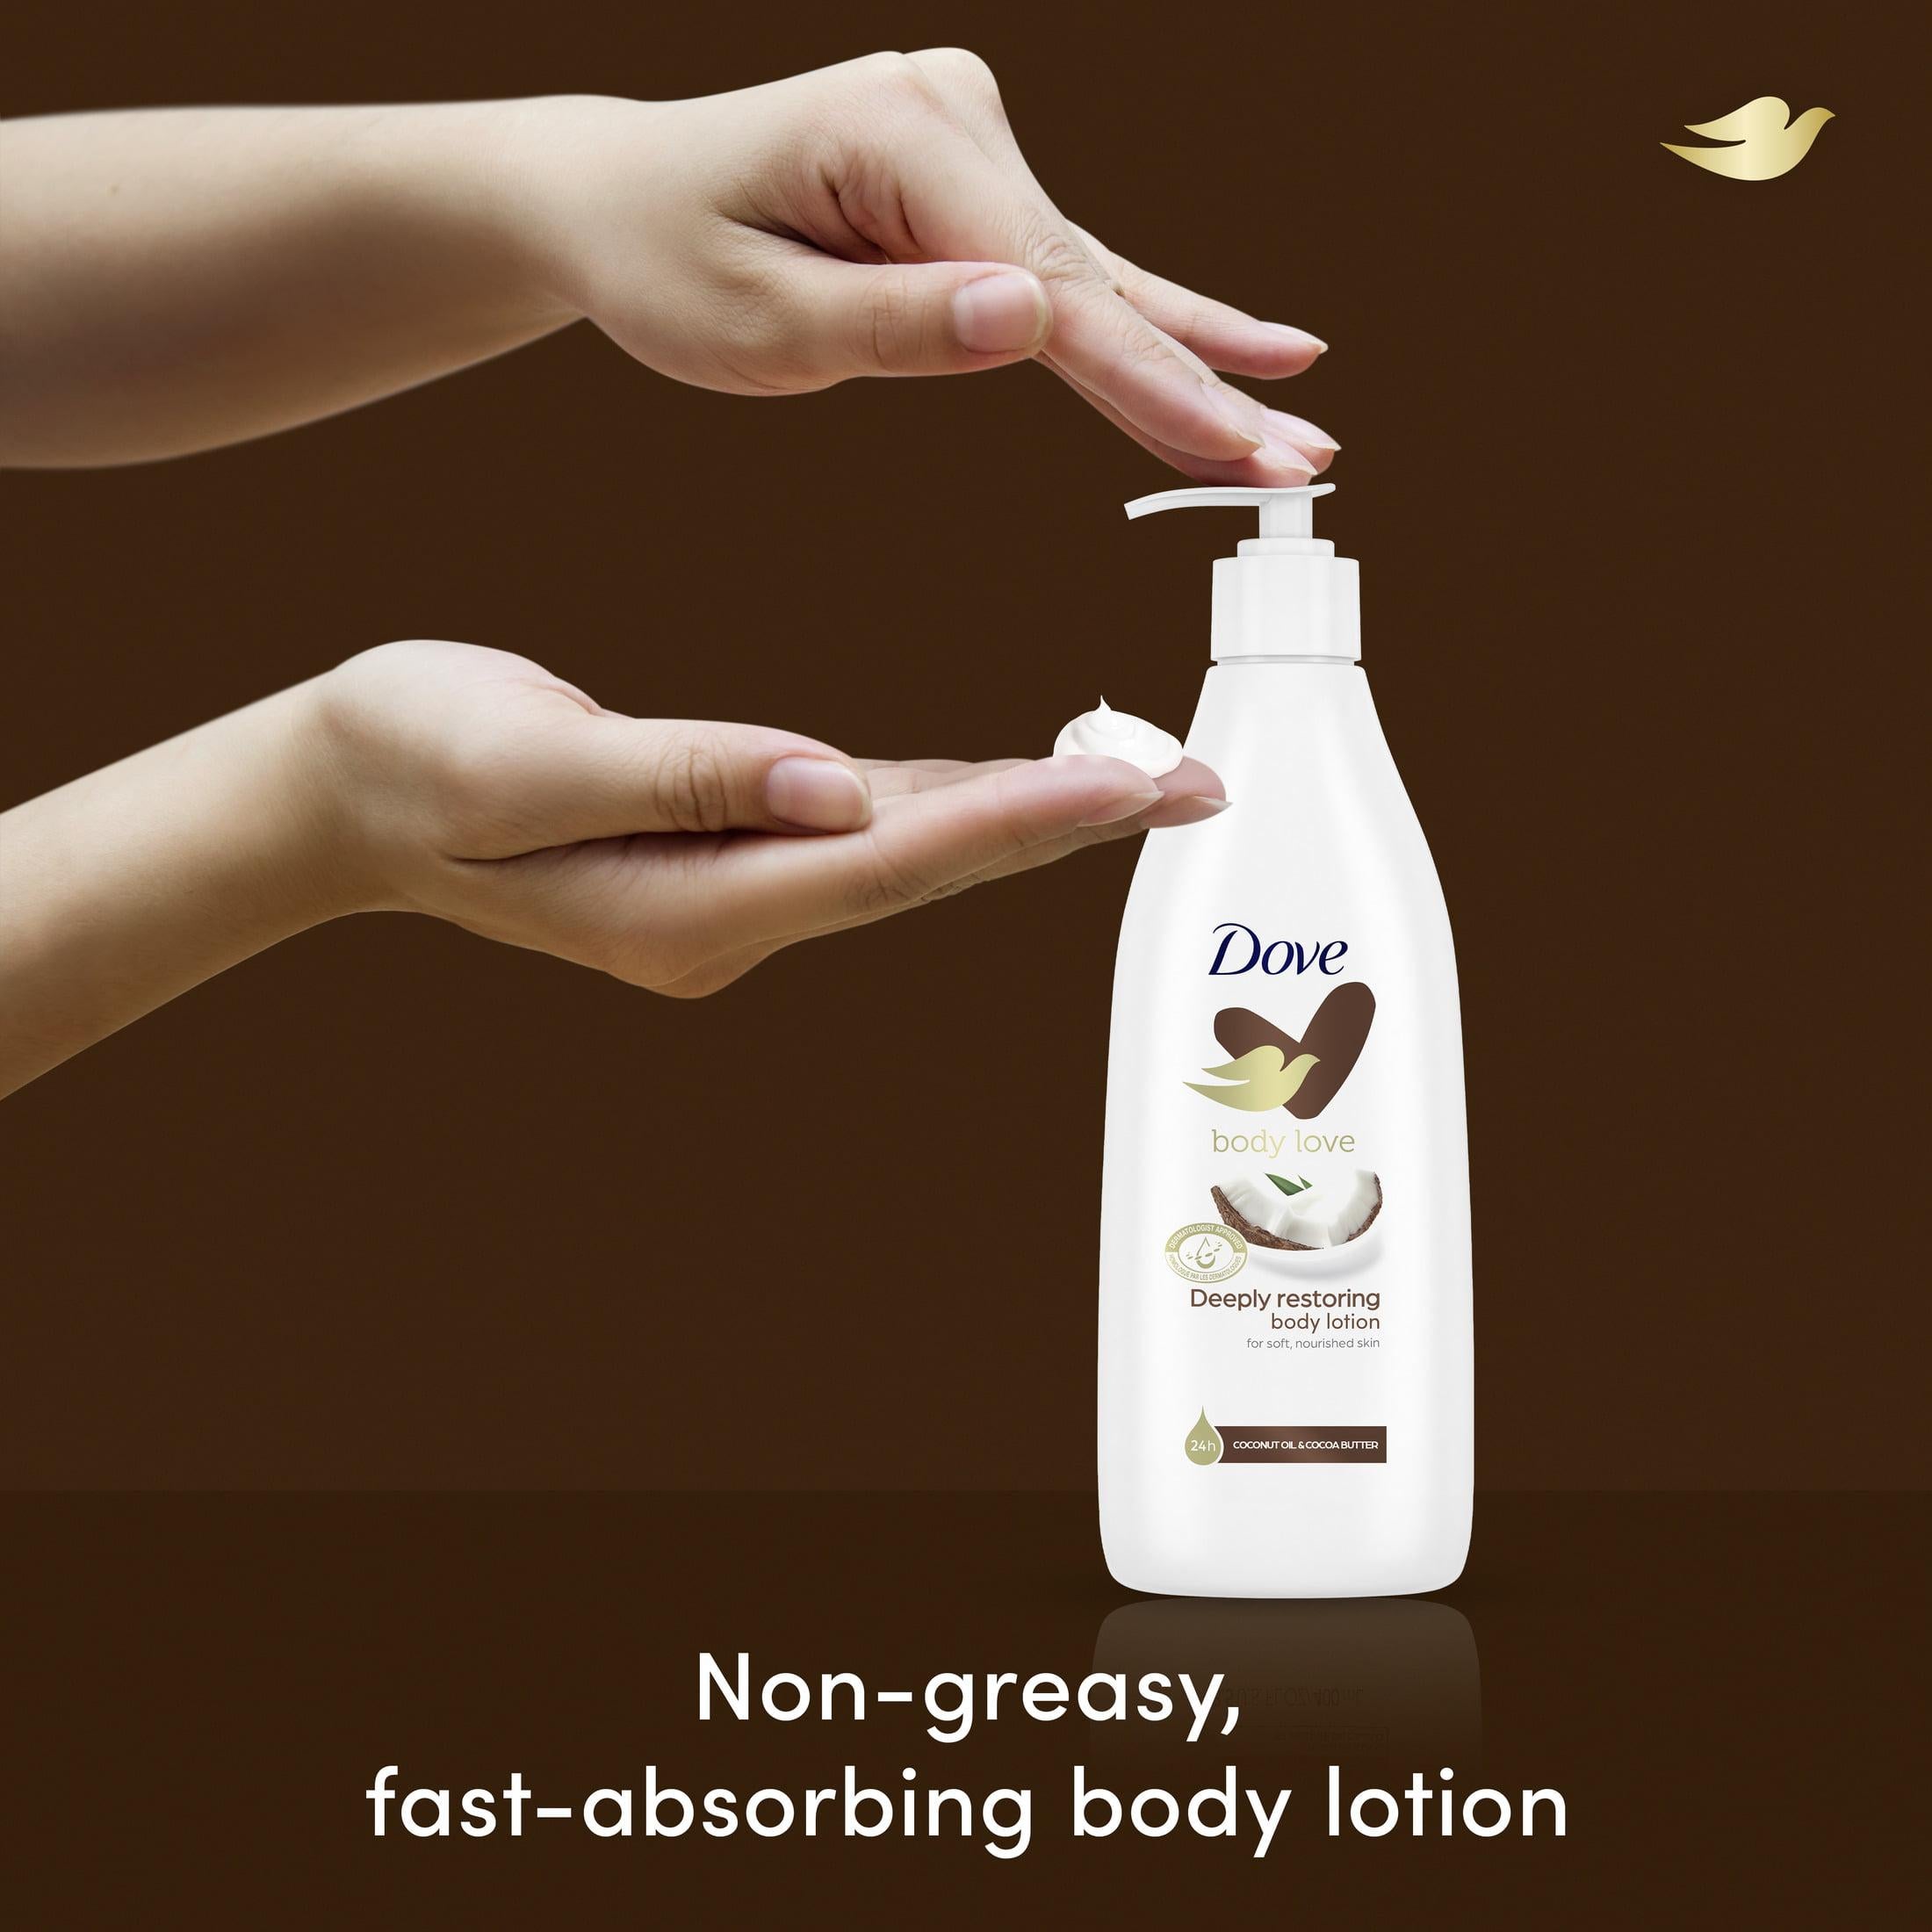 Dove Body Love Deeply Restoring Body Lotion for Dry Skin, Coconut Oil and Cocoa Butter, 13.5 fl oz | MTTS413